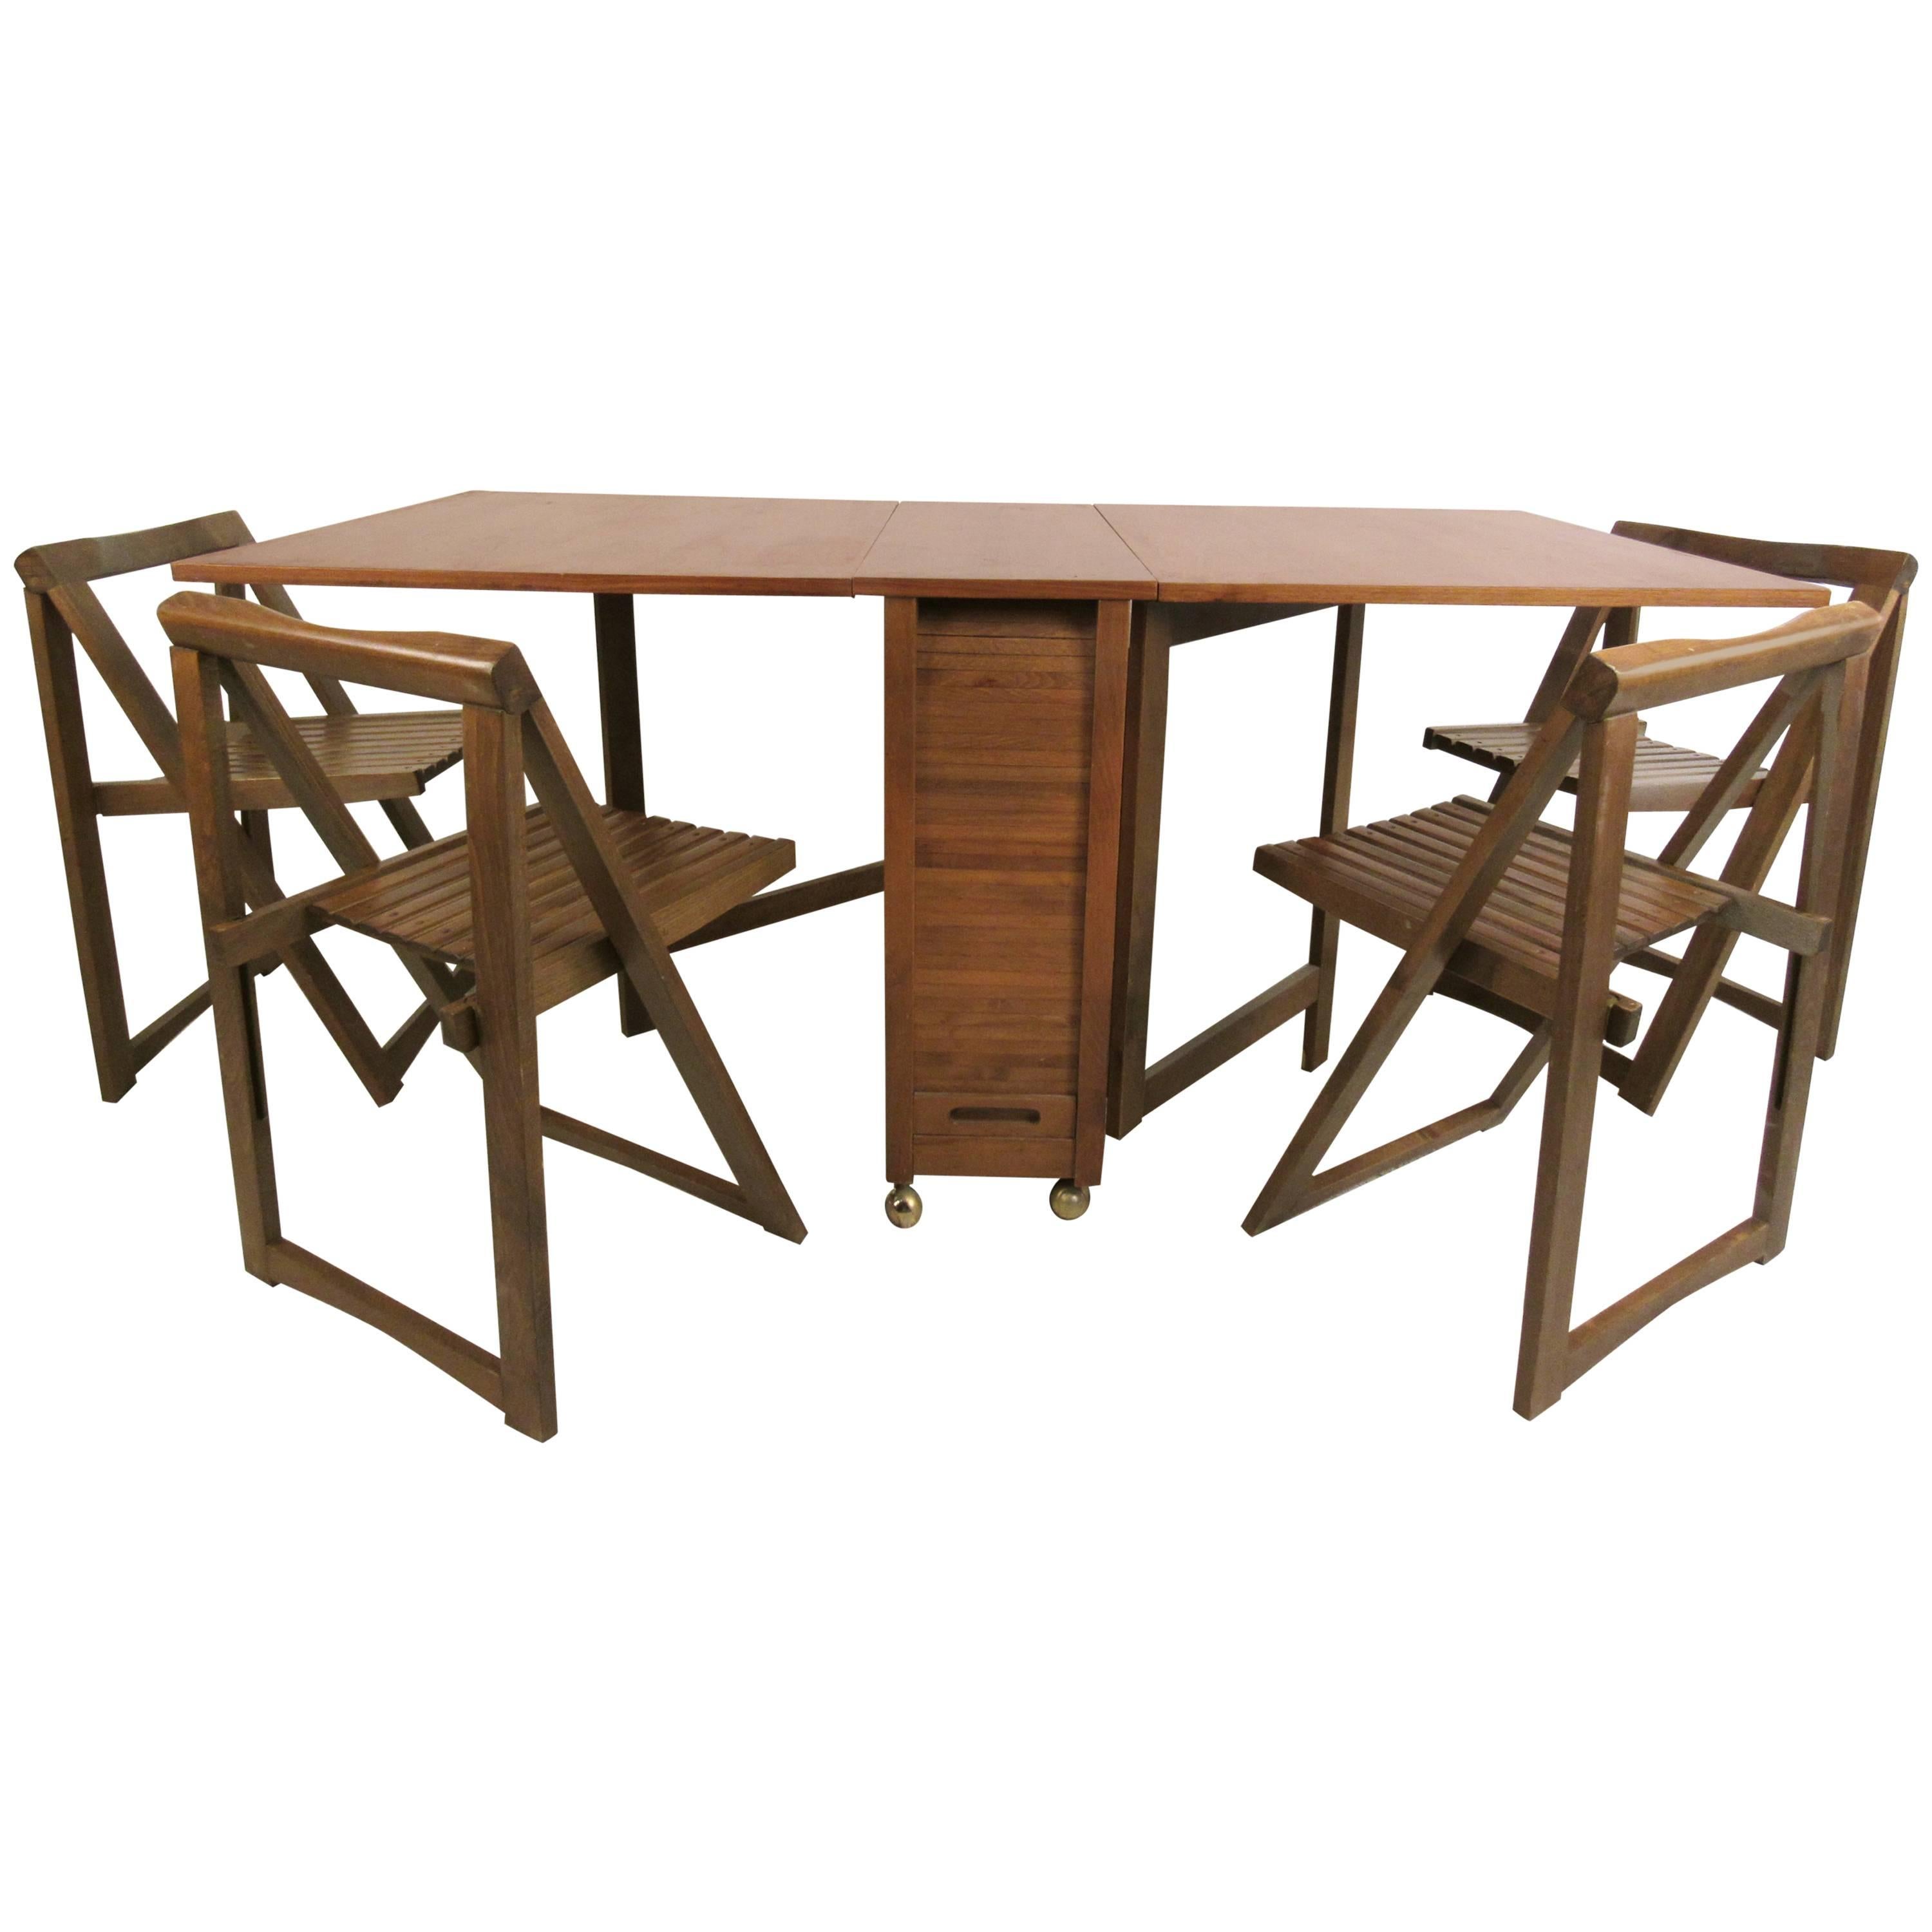 Mid-Century Modern Drop-Leaf Table with Chairs